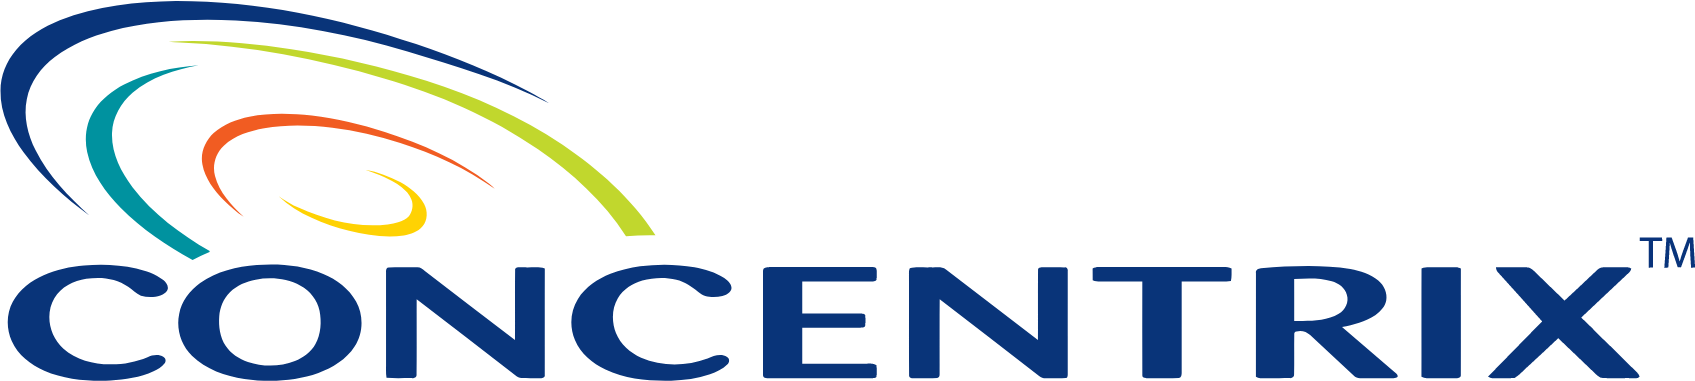 Concentrix logo in transparent PNG and vectorized SVG formats